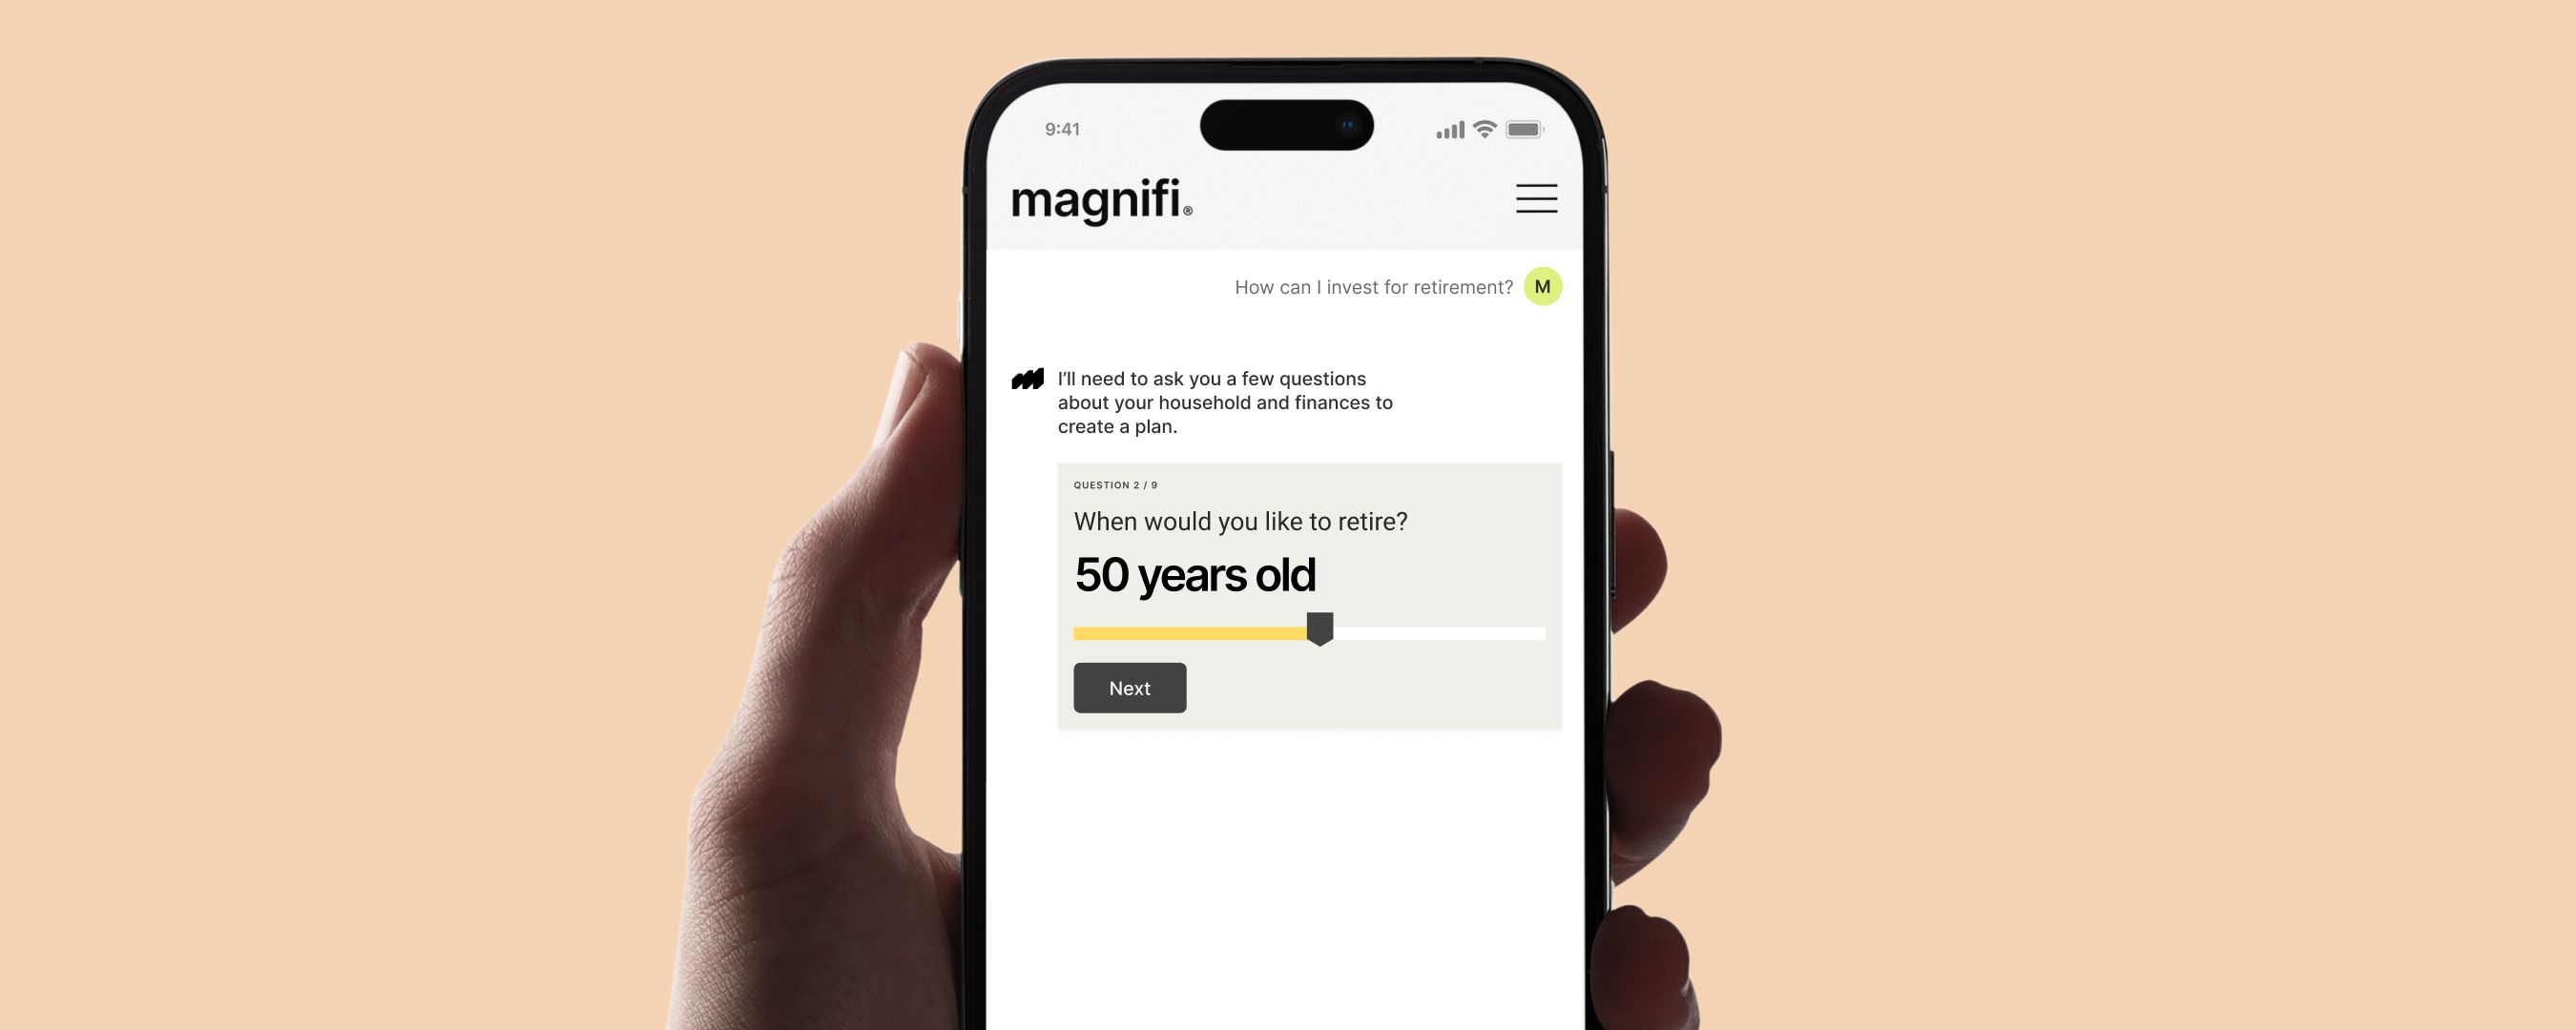 A man using the Magnifi AI investing app to invest